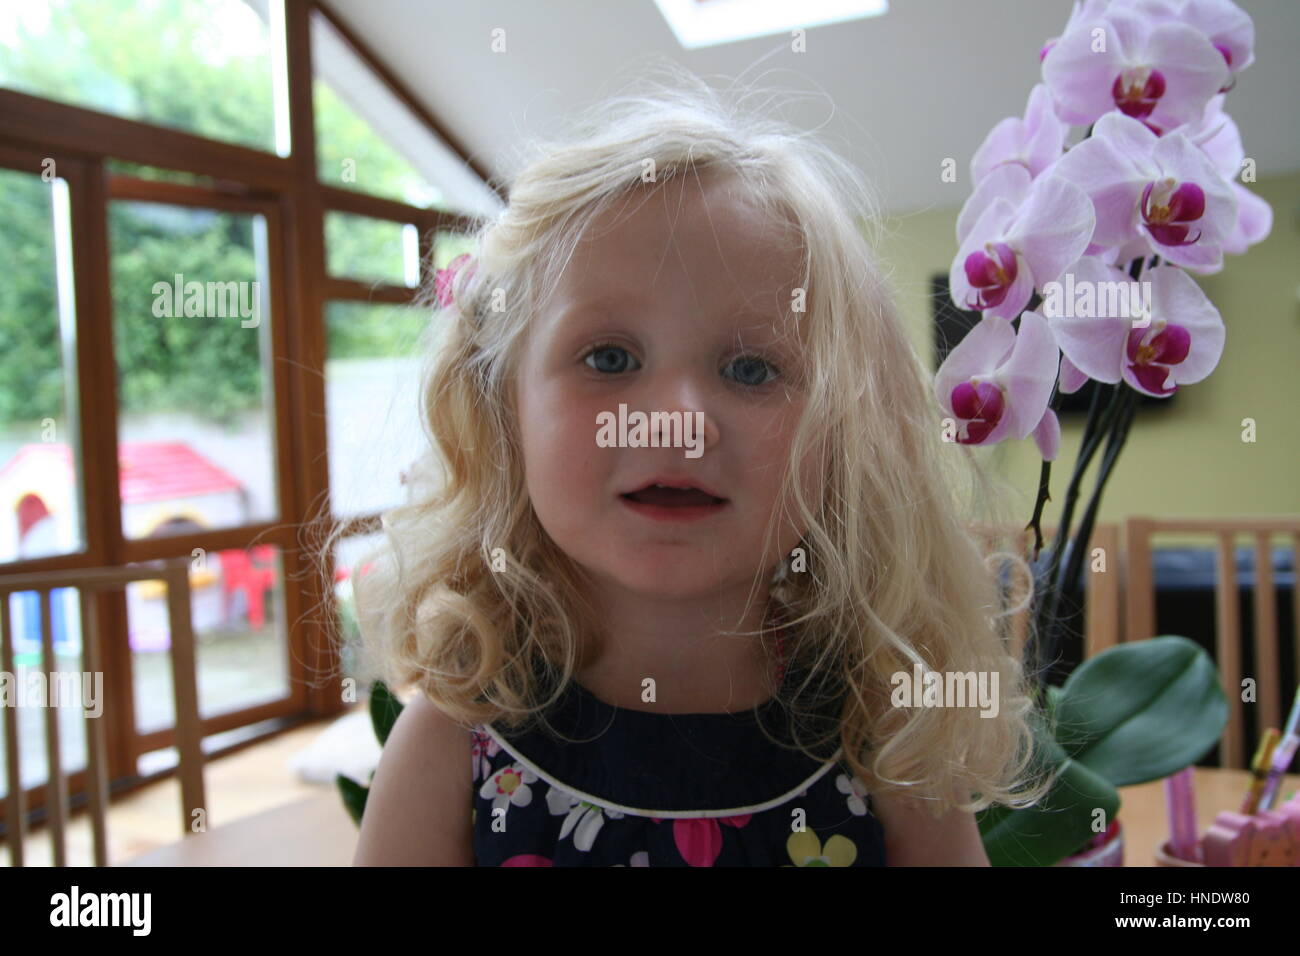 Little curly blonde girl kid toddler with long blonde curly hair smiling, beautiful blonde child, healthy baby, pretty innoncent innoncence concept Stock Photo